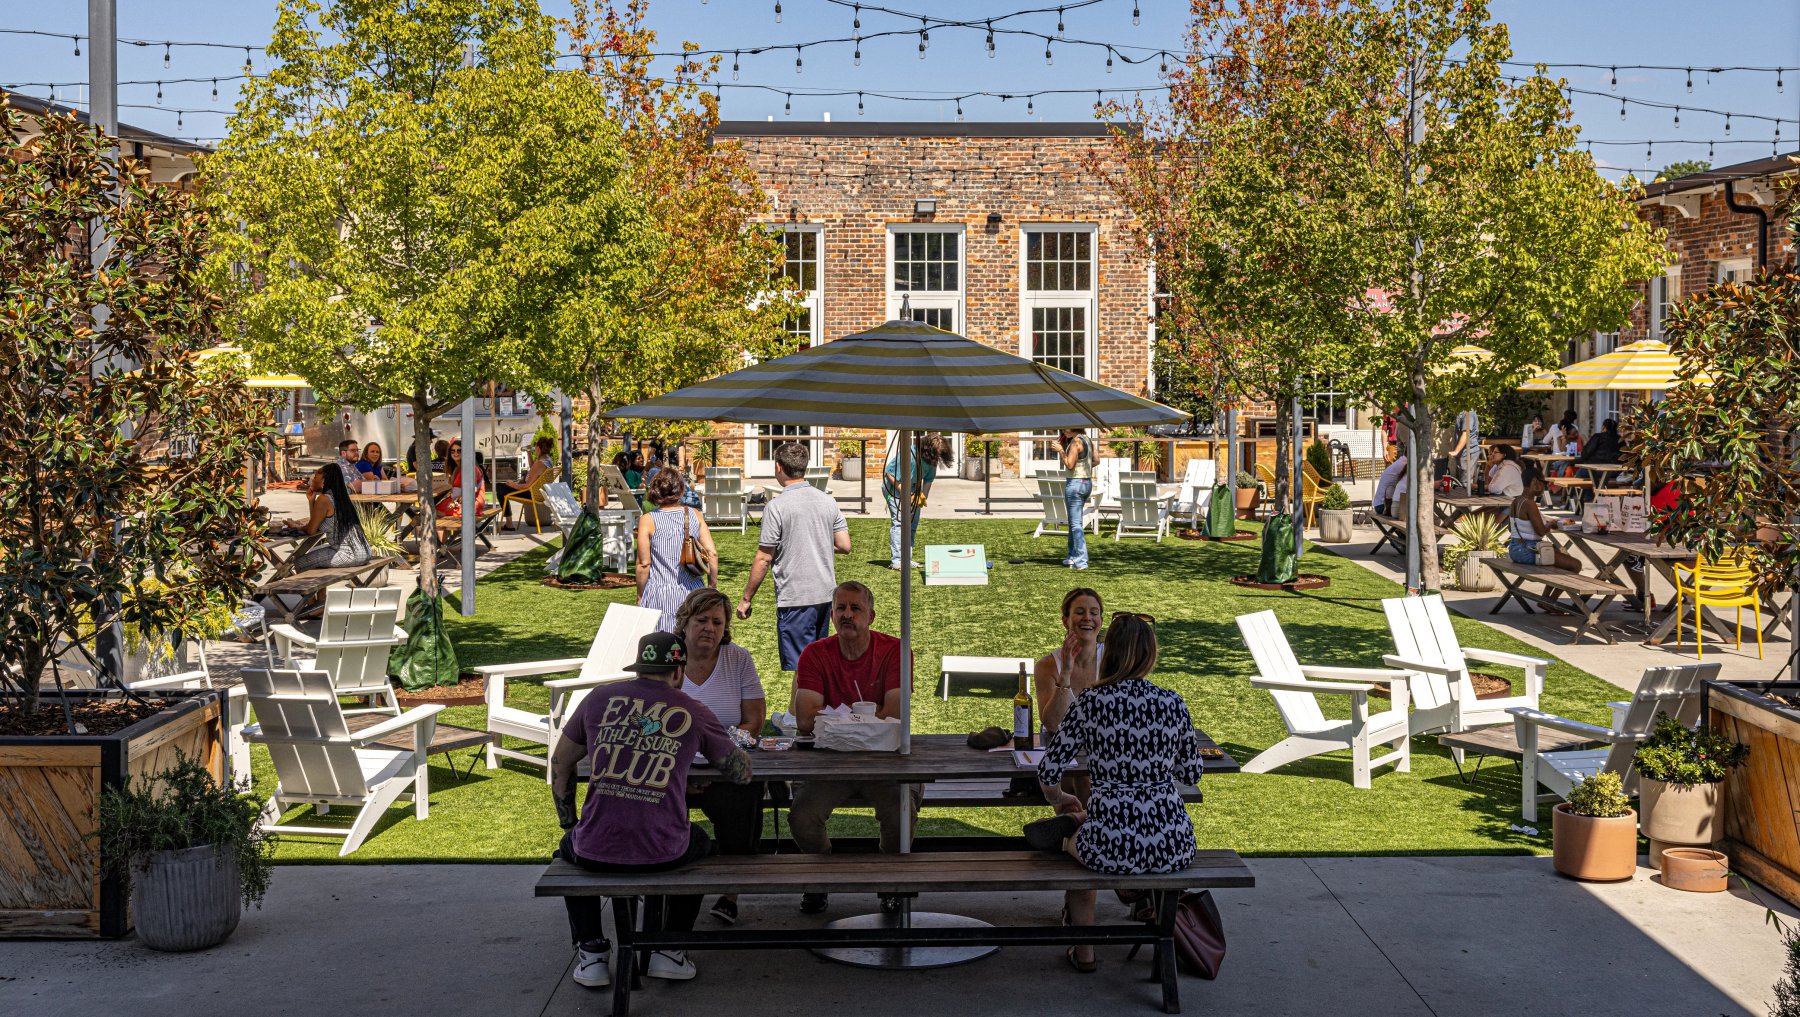 People sitting at tables and chairs outdoors in courtyard during daytime with trees and string lights